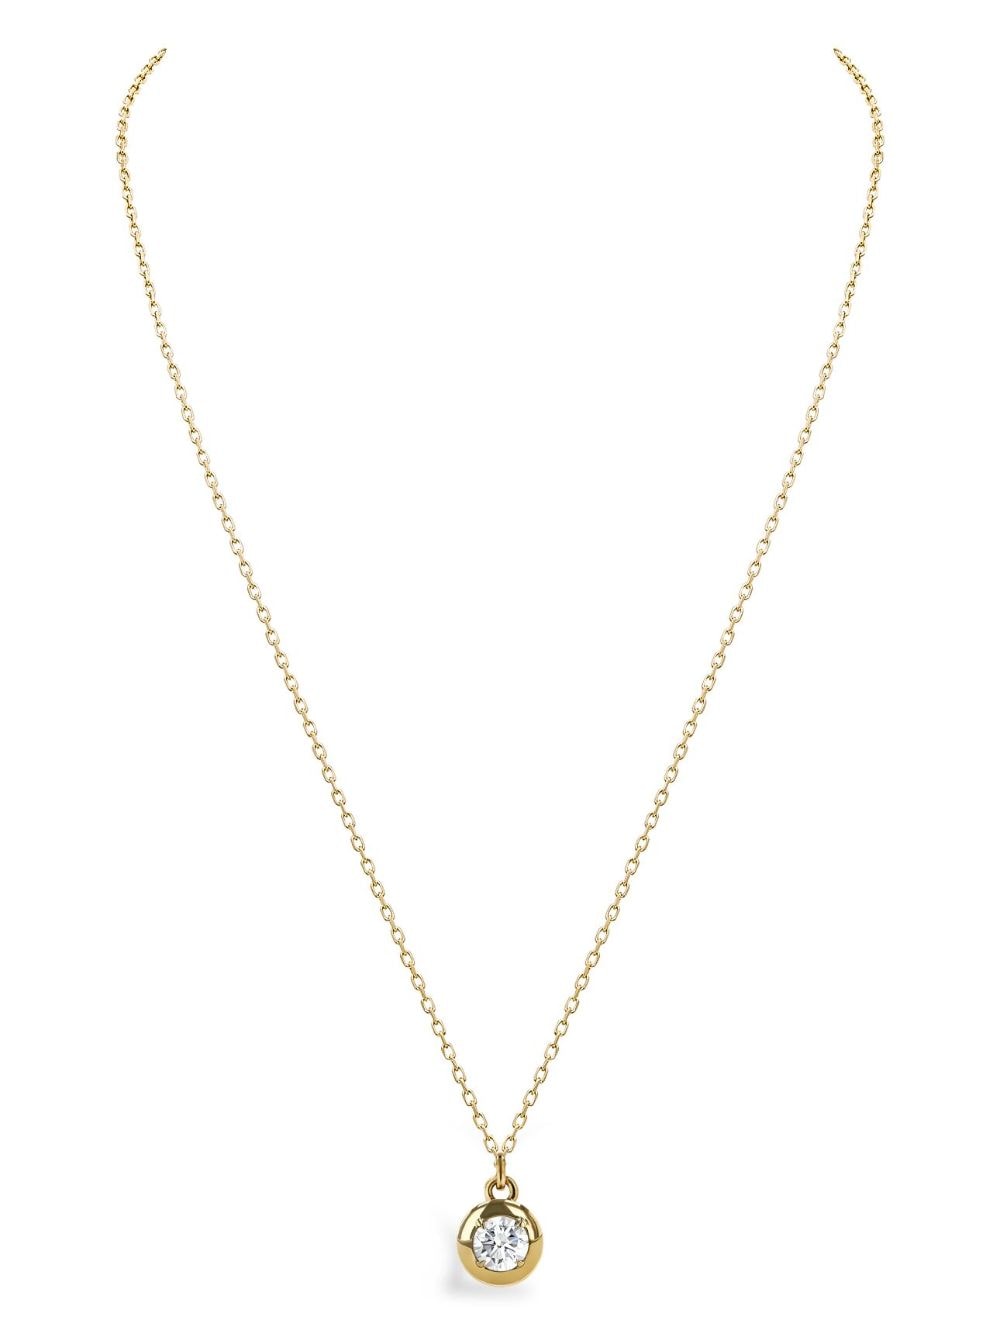 Shop Pragnell 18kt Yellow Gold Skimming Diamond Necklace